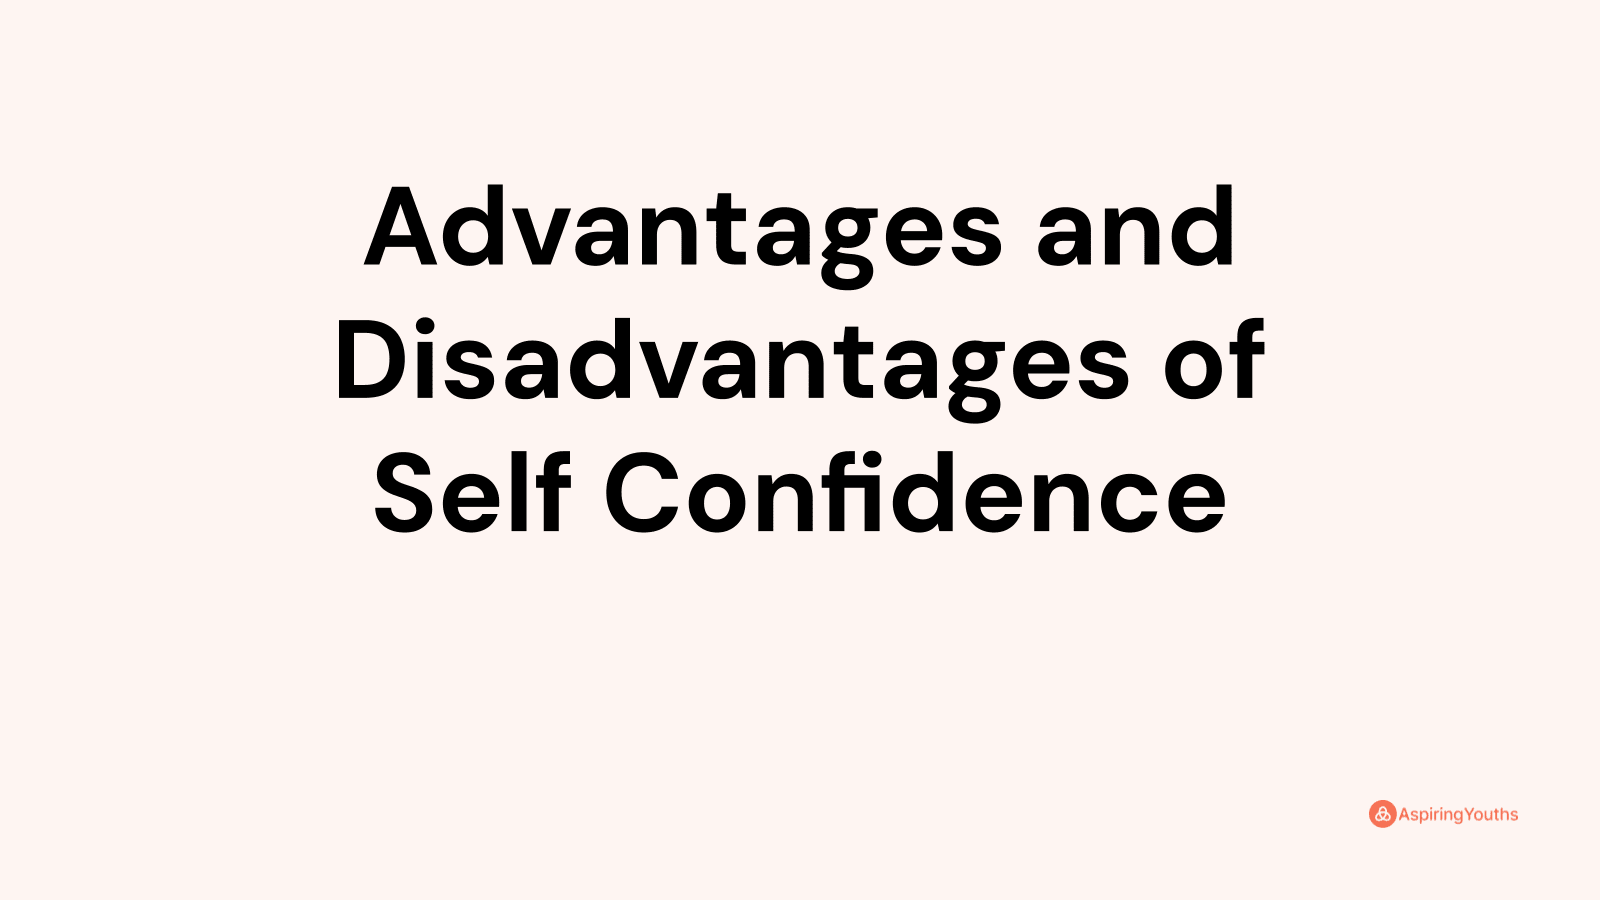 Advantages and disadvantages of Self Confidence